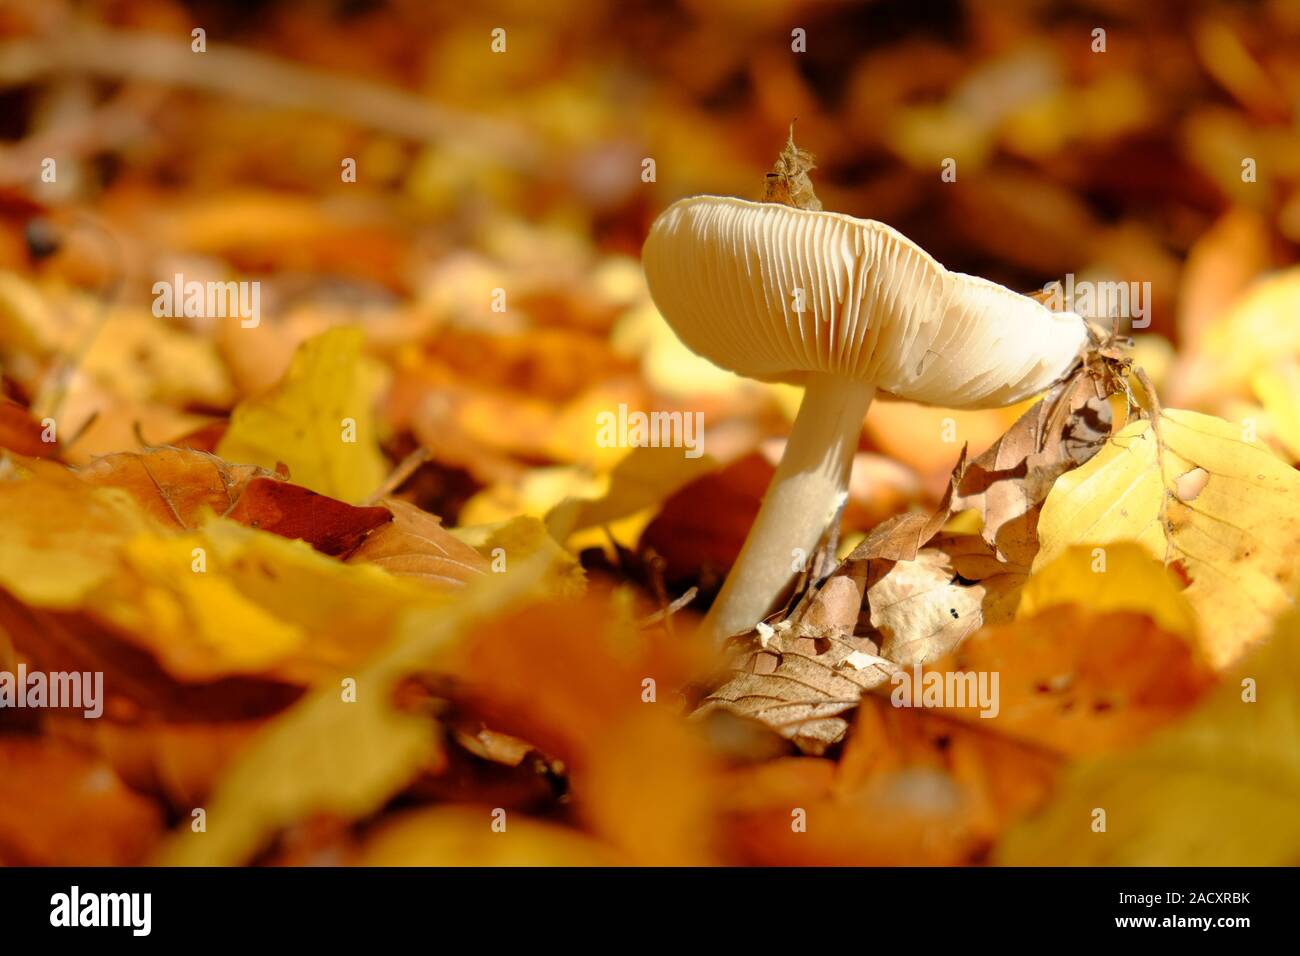 Autumn in the northern Steigerwald, Lower Franconia, Bavaria, Germany Stock Photo